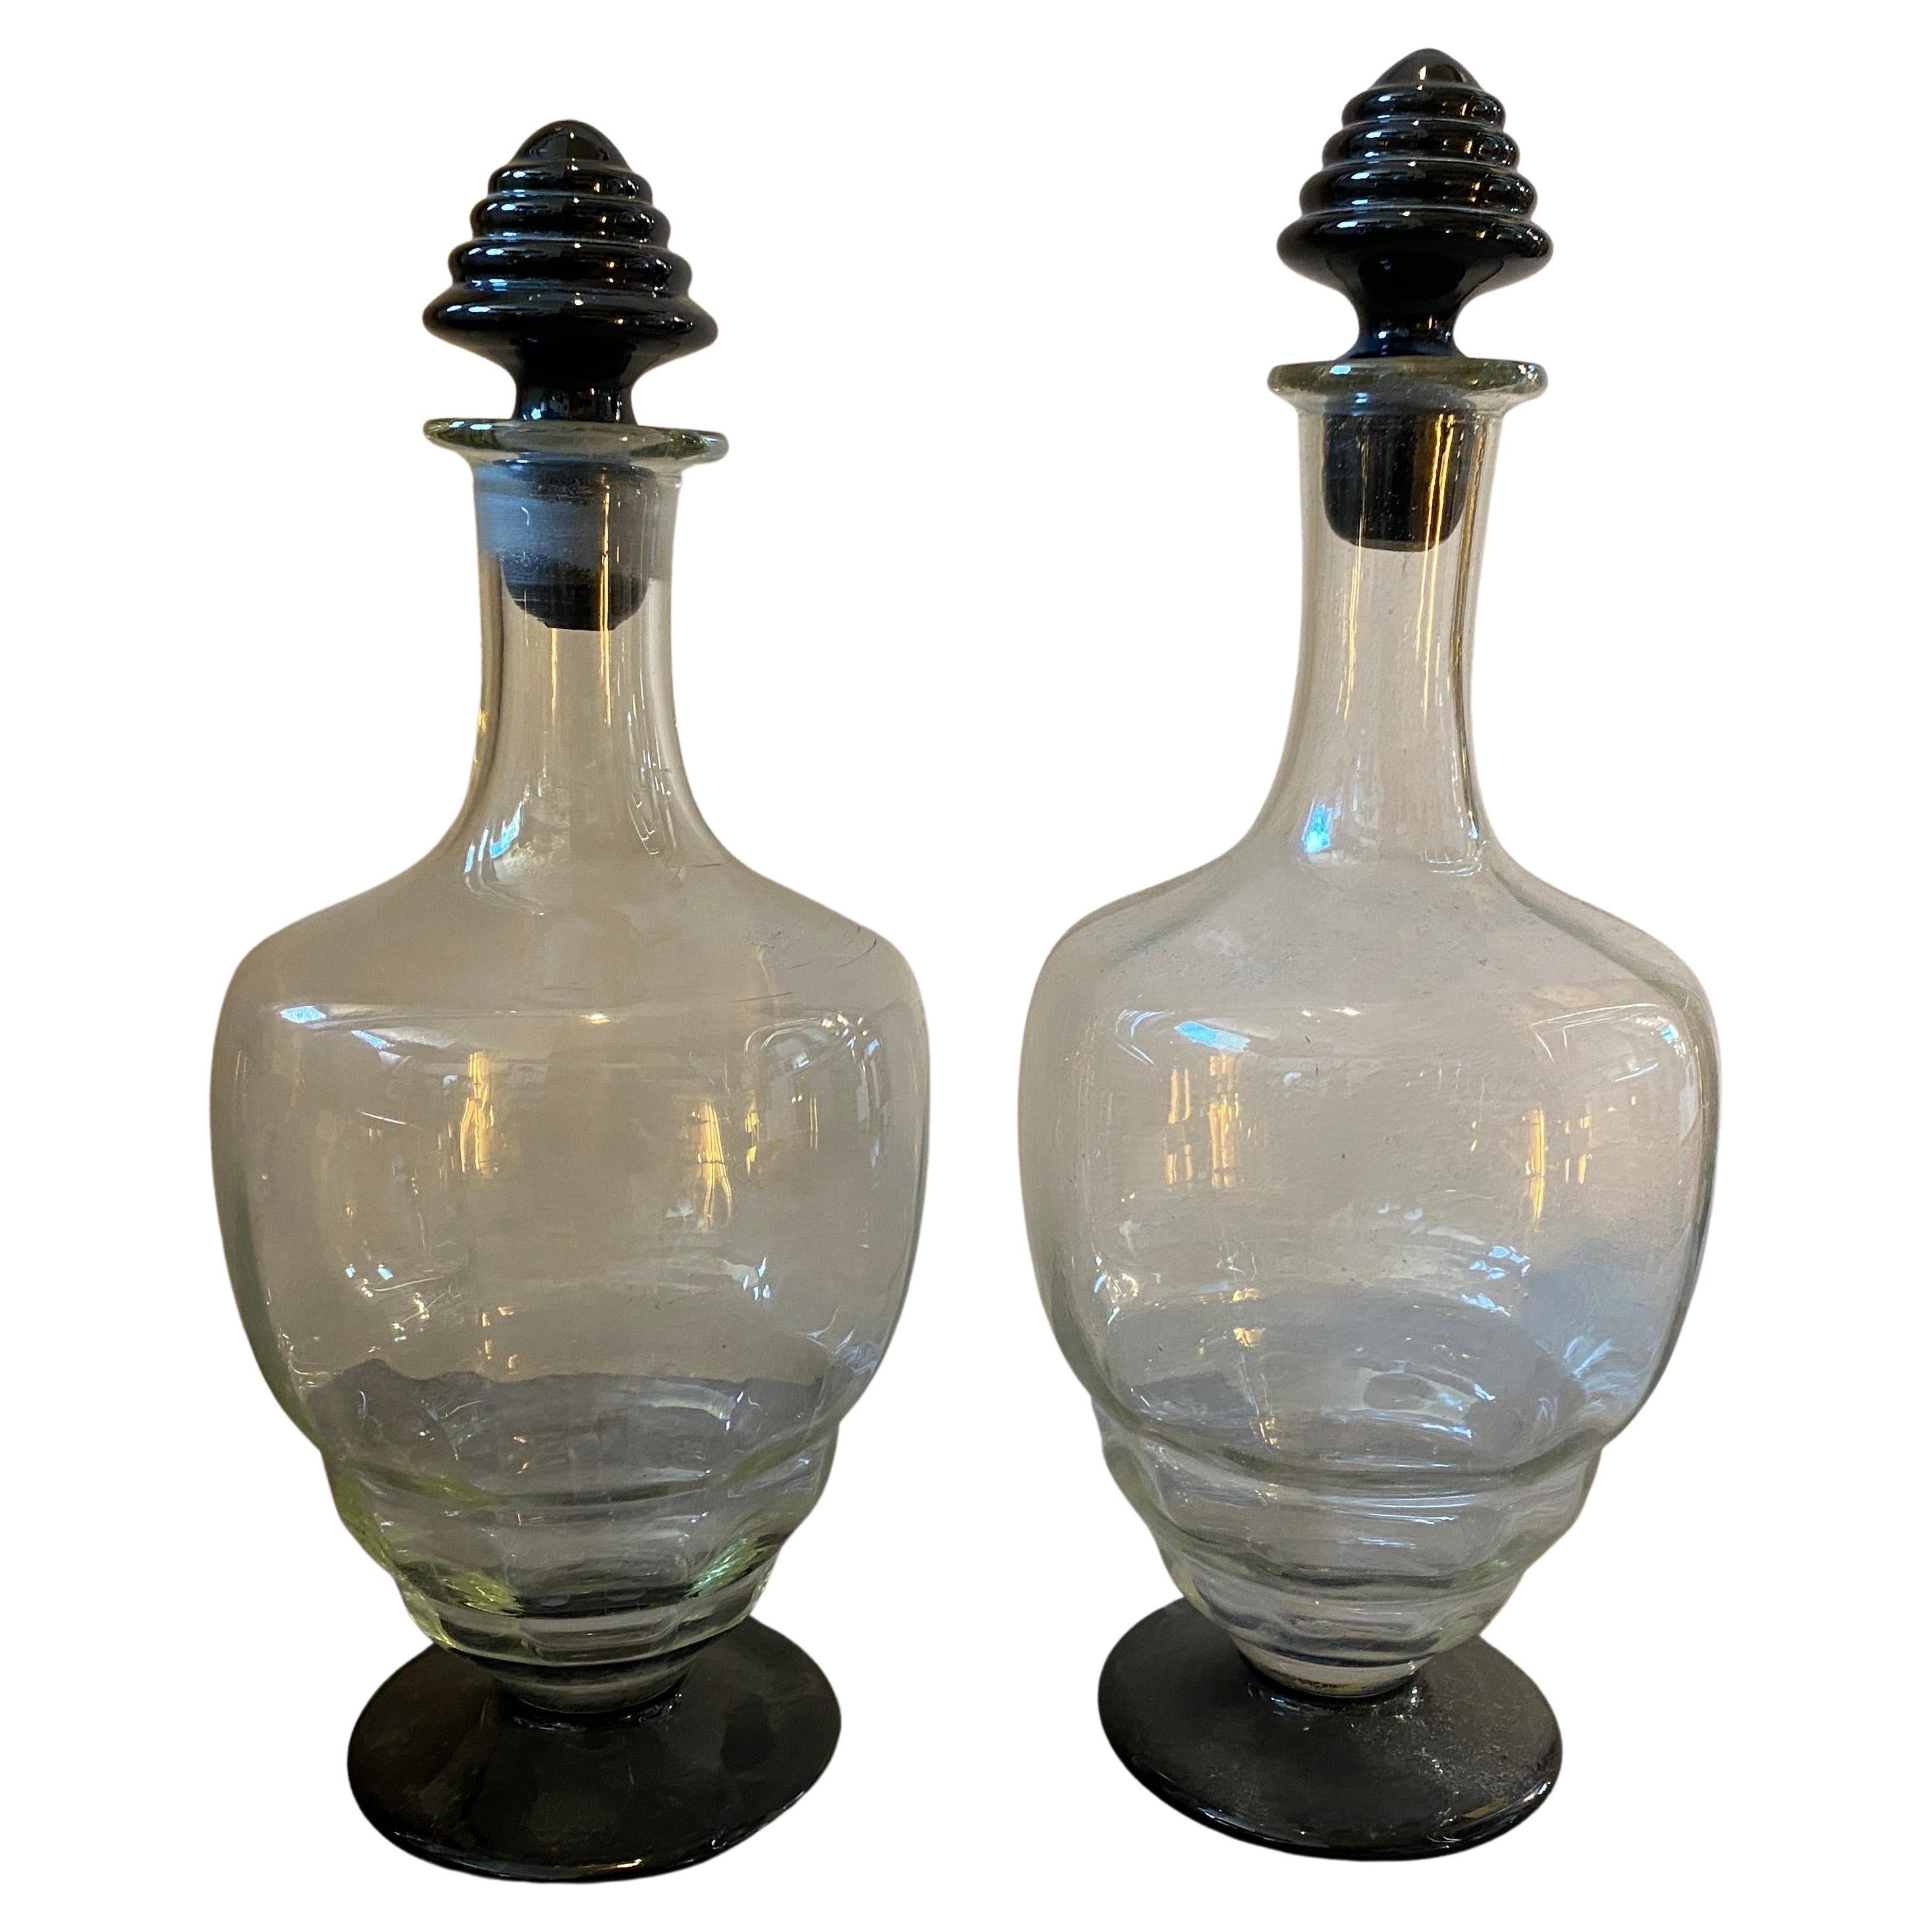 Two transparent and black murano glass liquor bottles manufactured in Italy in the Thirties in the style of Napoleone Martinuzzi. One bottle it's 31 cm in height, the other one is 29 cm in height. They are in perfect condition as you can see in the